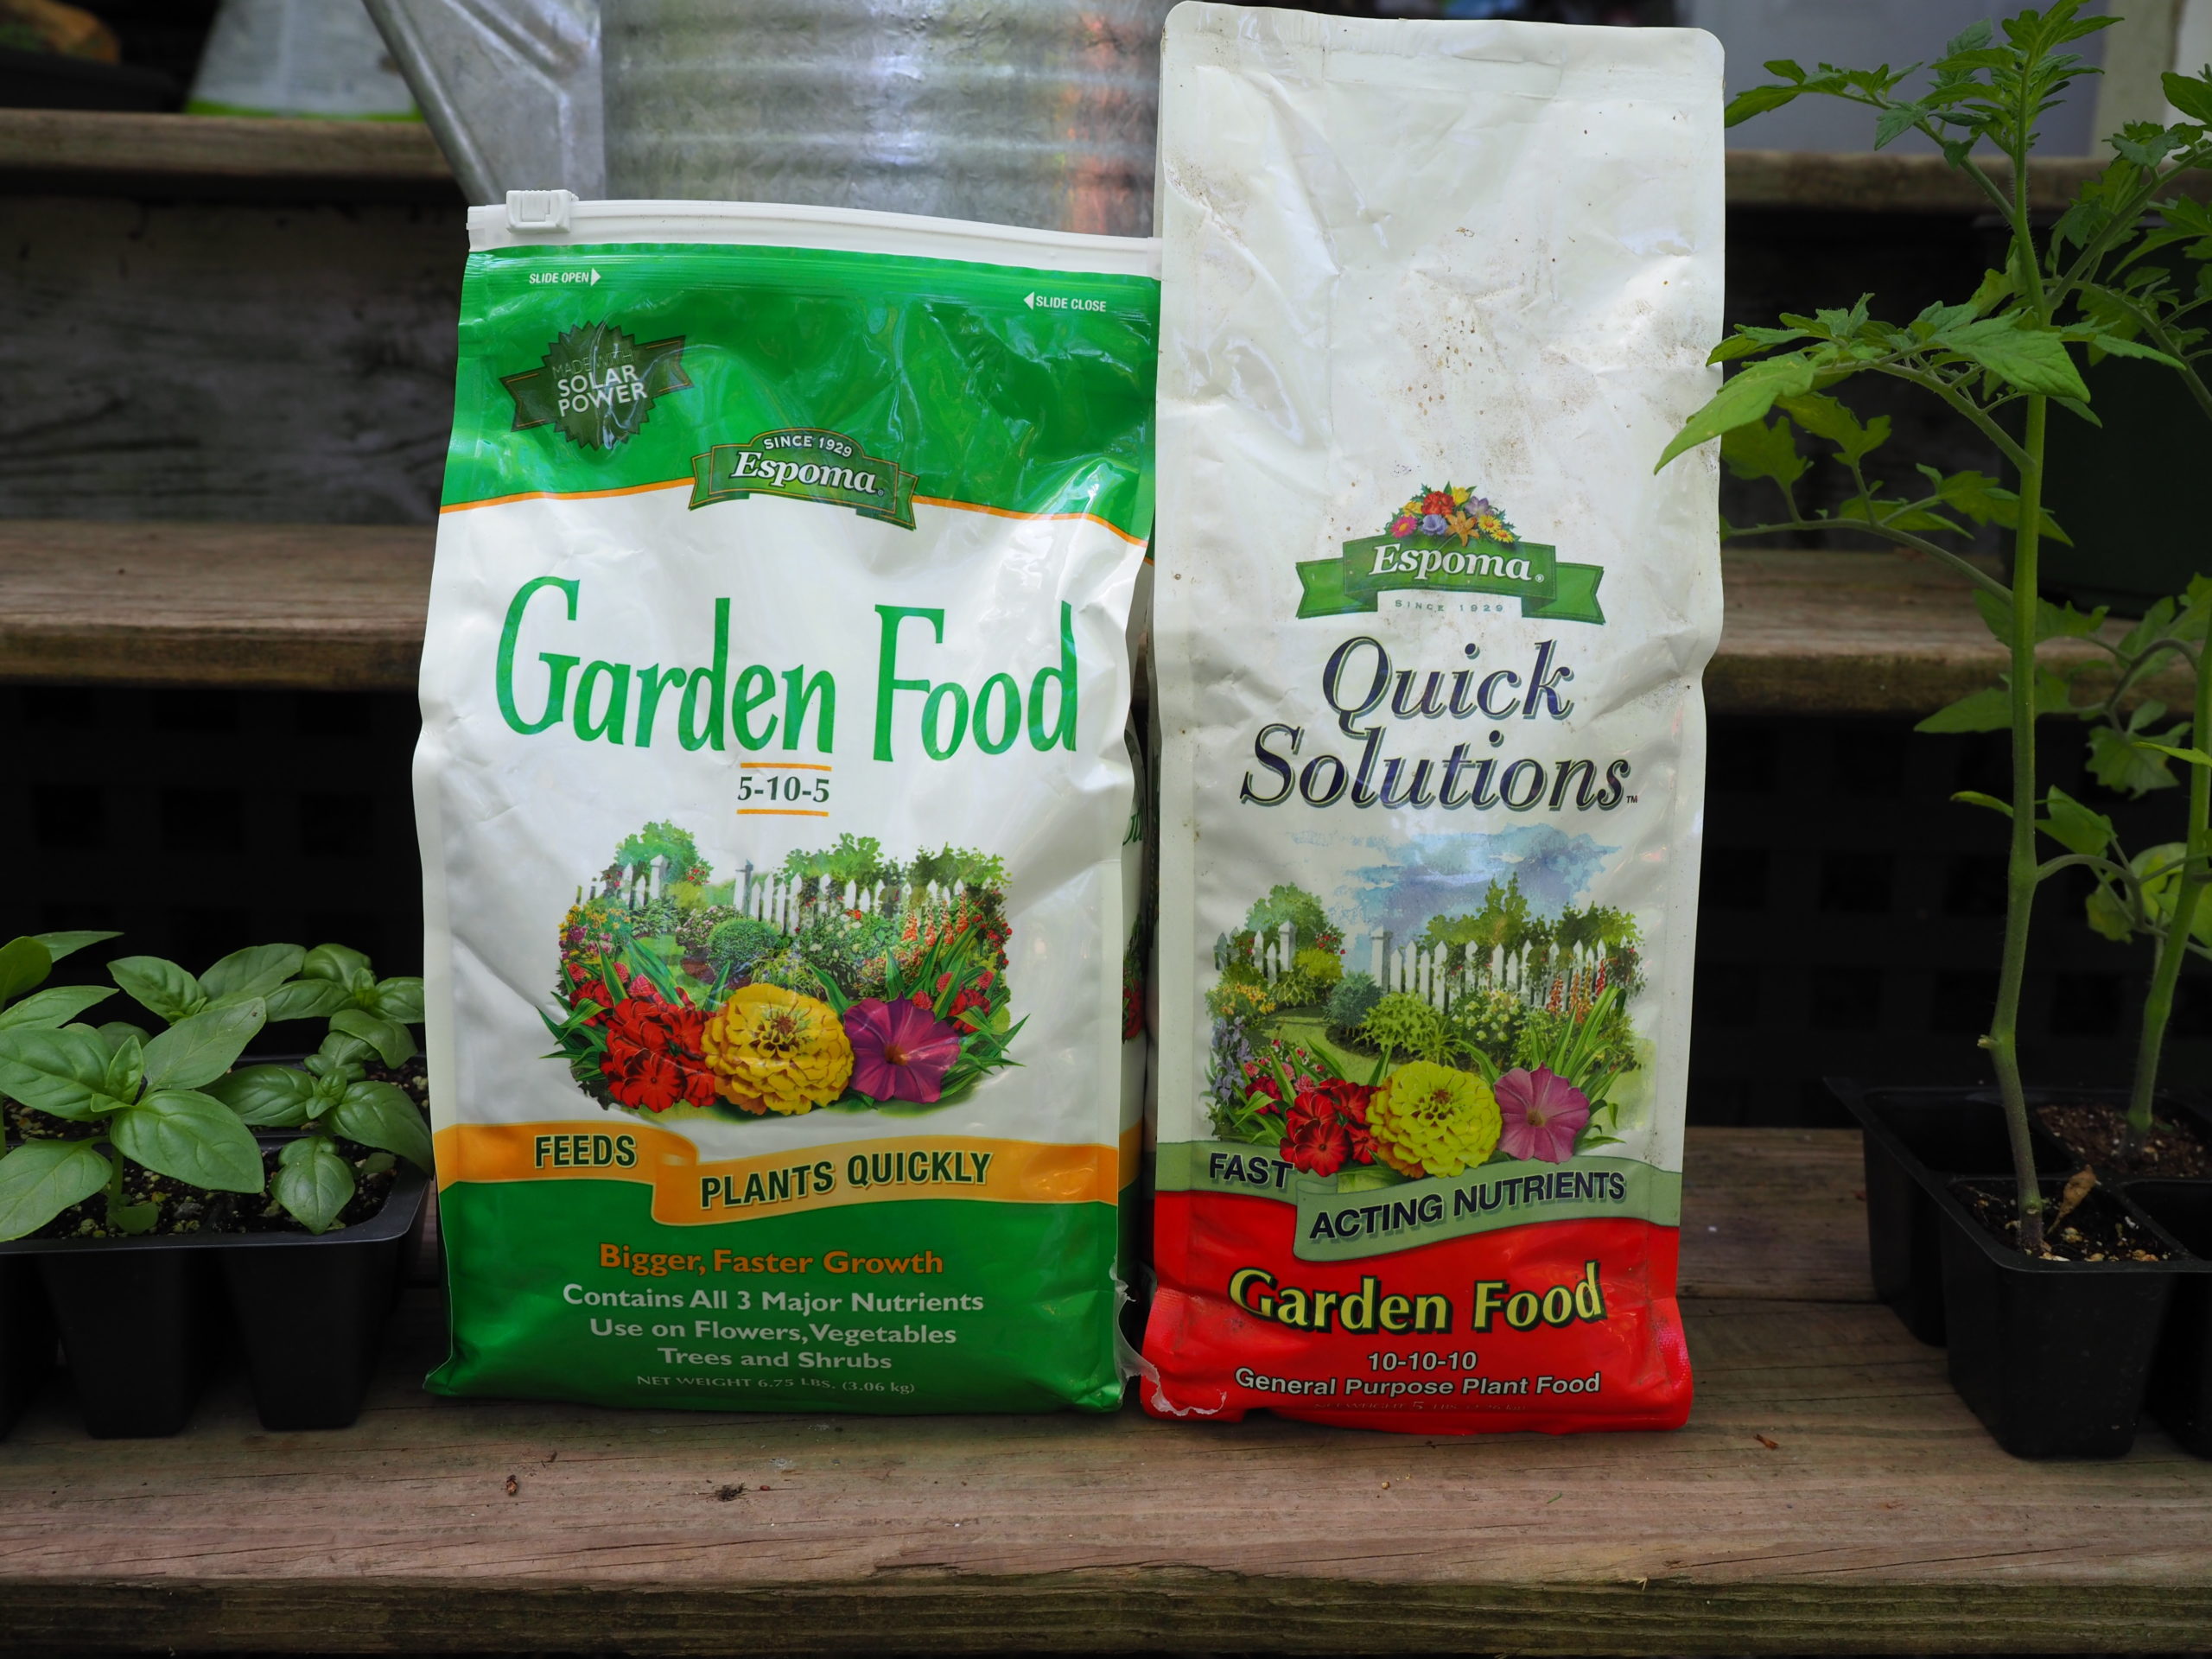 Beware of your brands. Most gardeners equate the Espoma brand with organics, but here are two of their products that are chemical and not organic fertilizers. The directions caution “when used with care, it is an excellent general purpose plant food.” On the left is a chemical based 5-10-5 with its 10-10-10 counterpart on the right. 